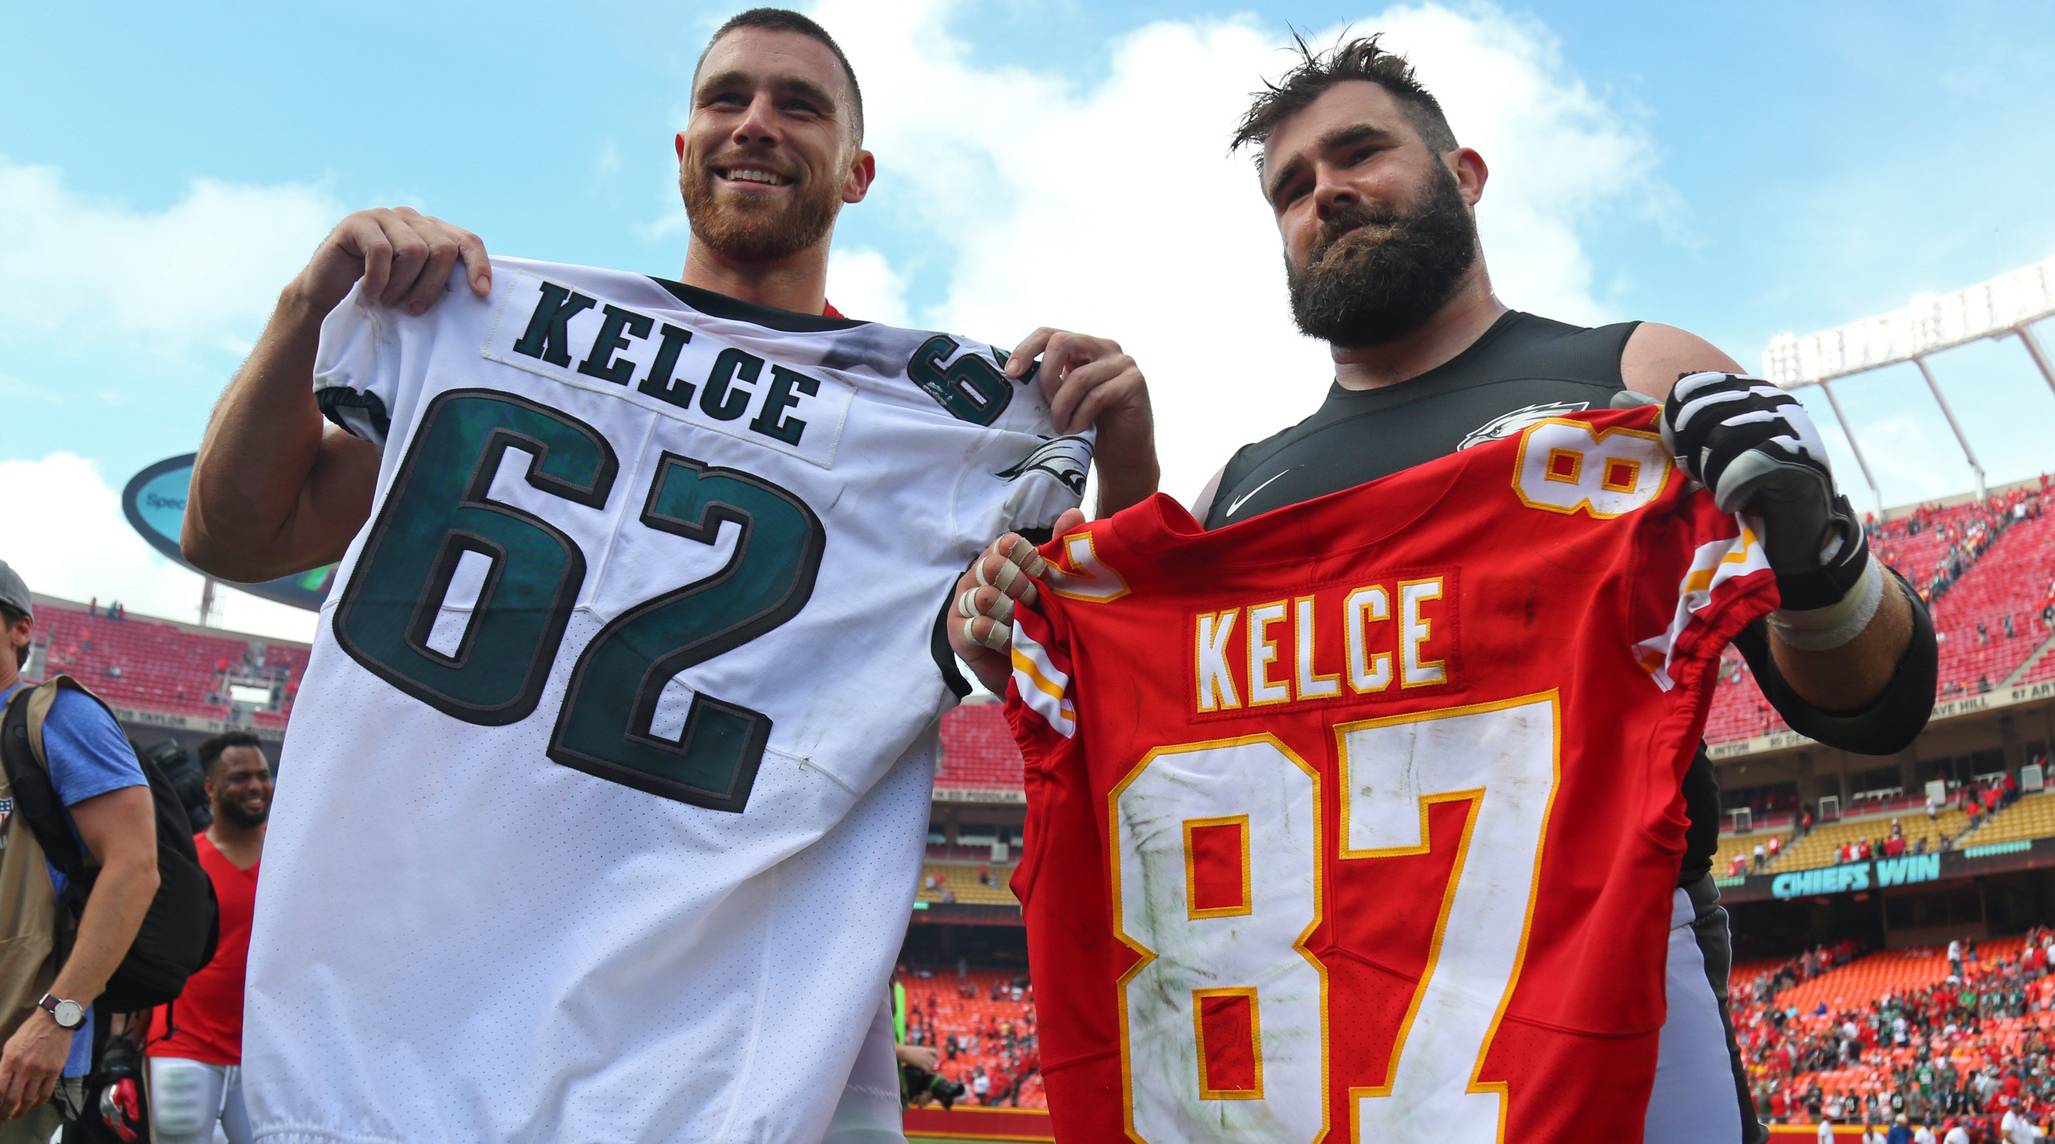 Kelce Parents Share Why They Chose Eagles Game Over Chiefs on Sunday